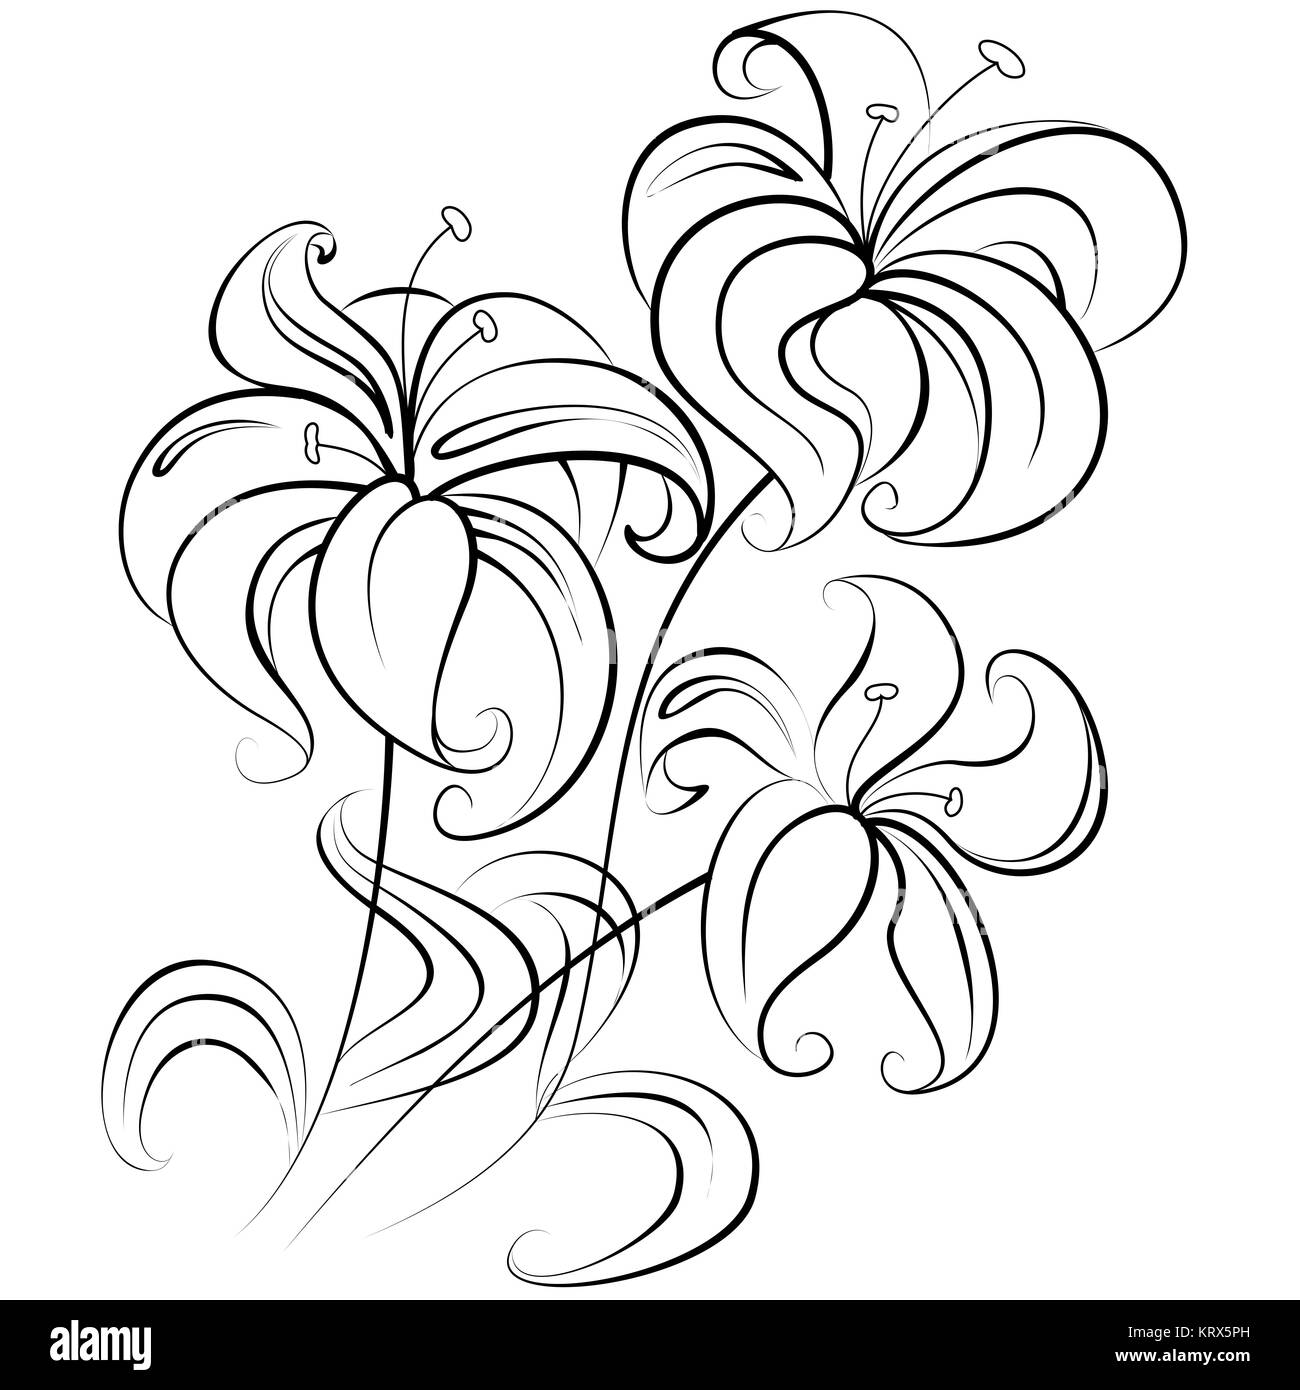 Illustration - stylized bouquet of flowers similar to a lily in a colorless version Stock Photo